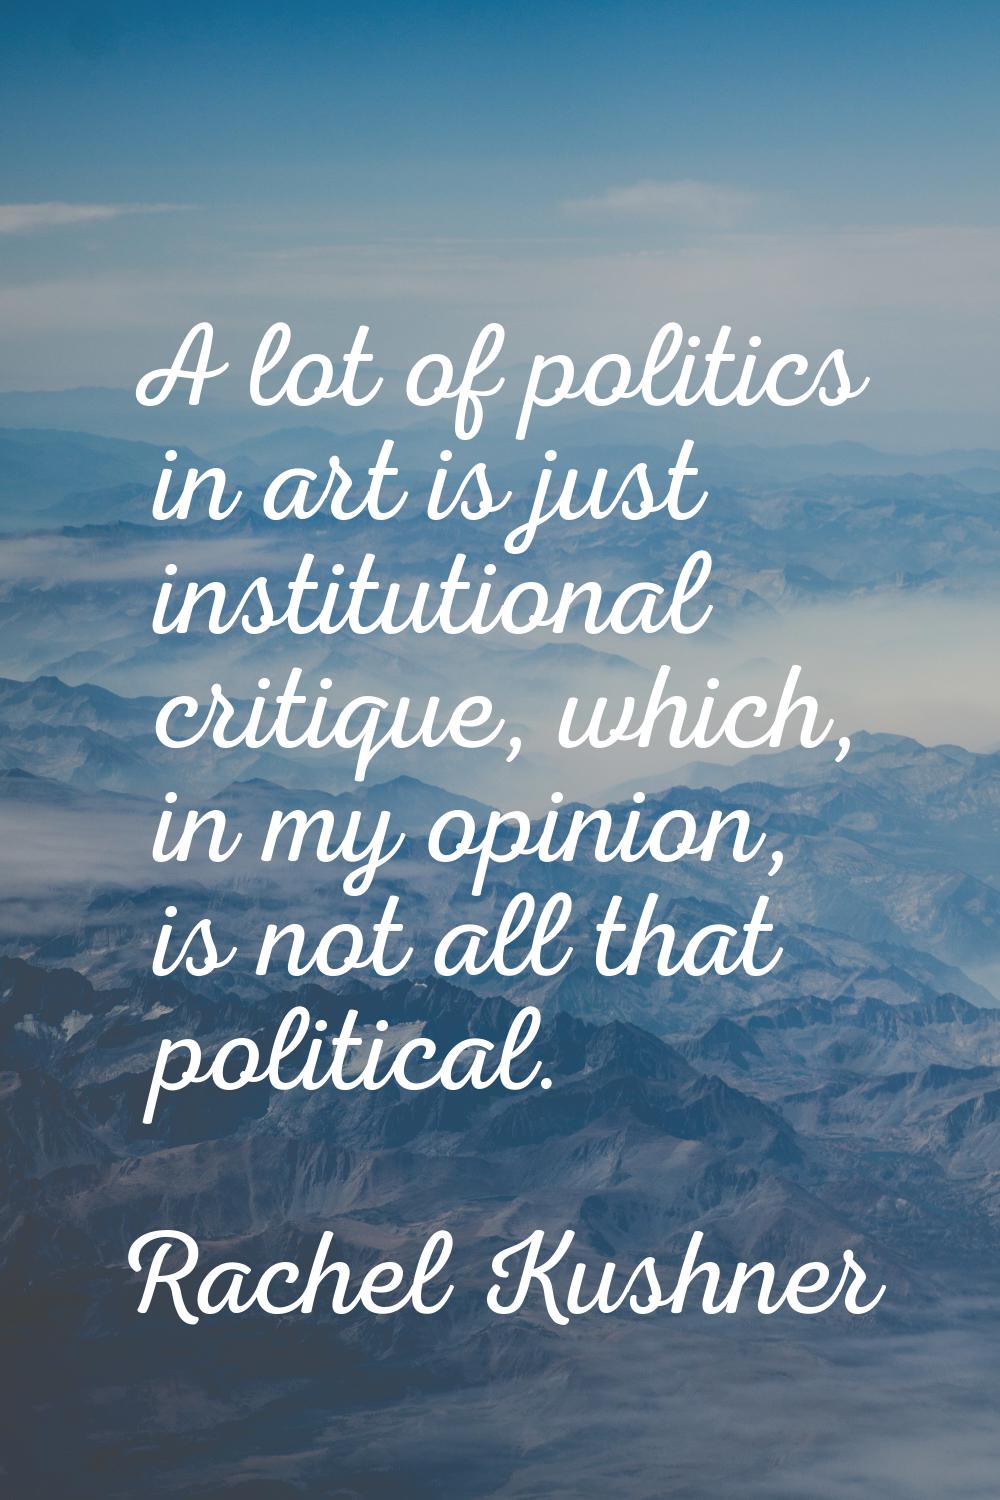 A lot of politics in art is just institutional critique, which, in my opinion, is not all that poli